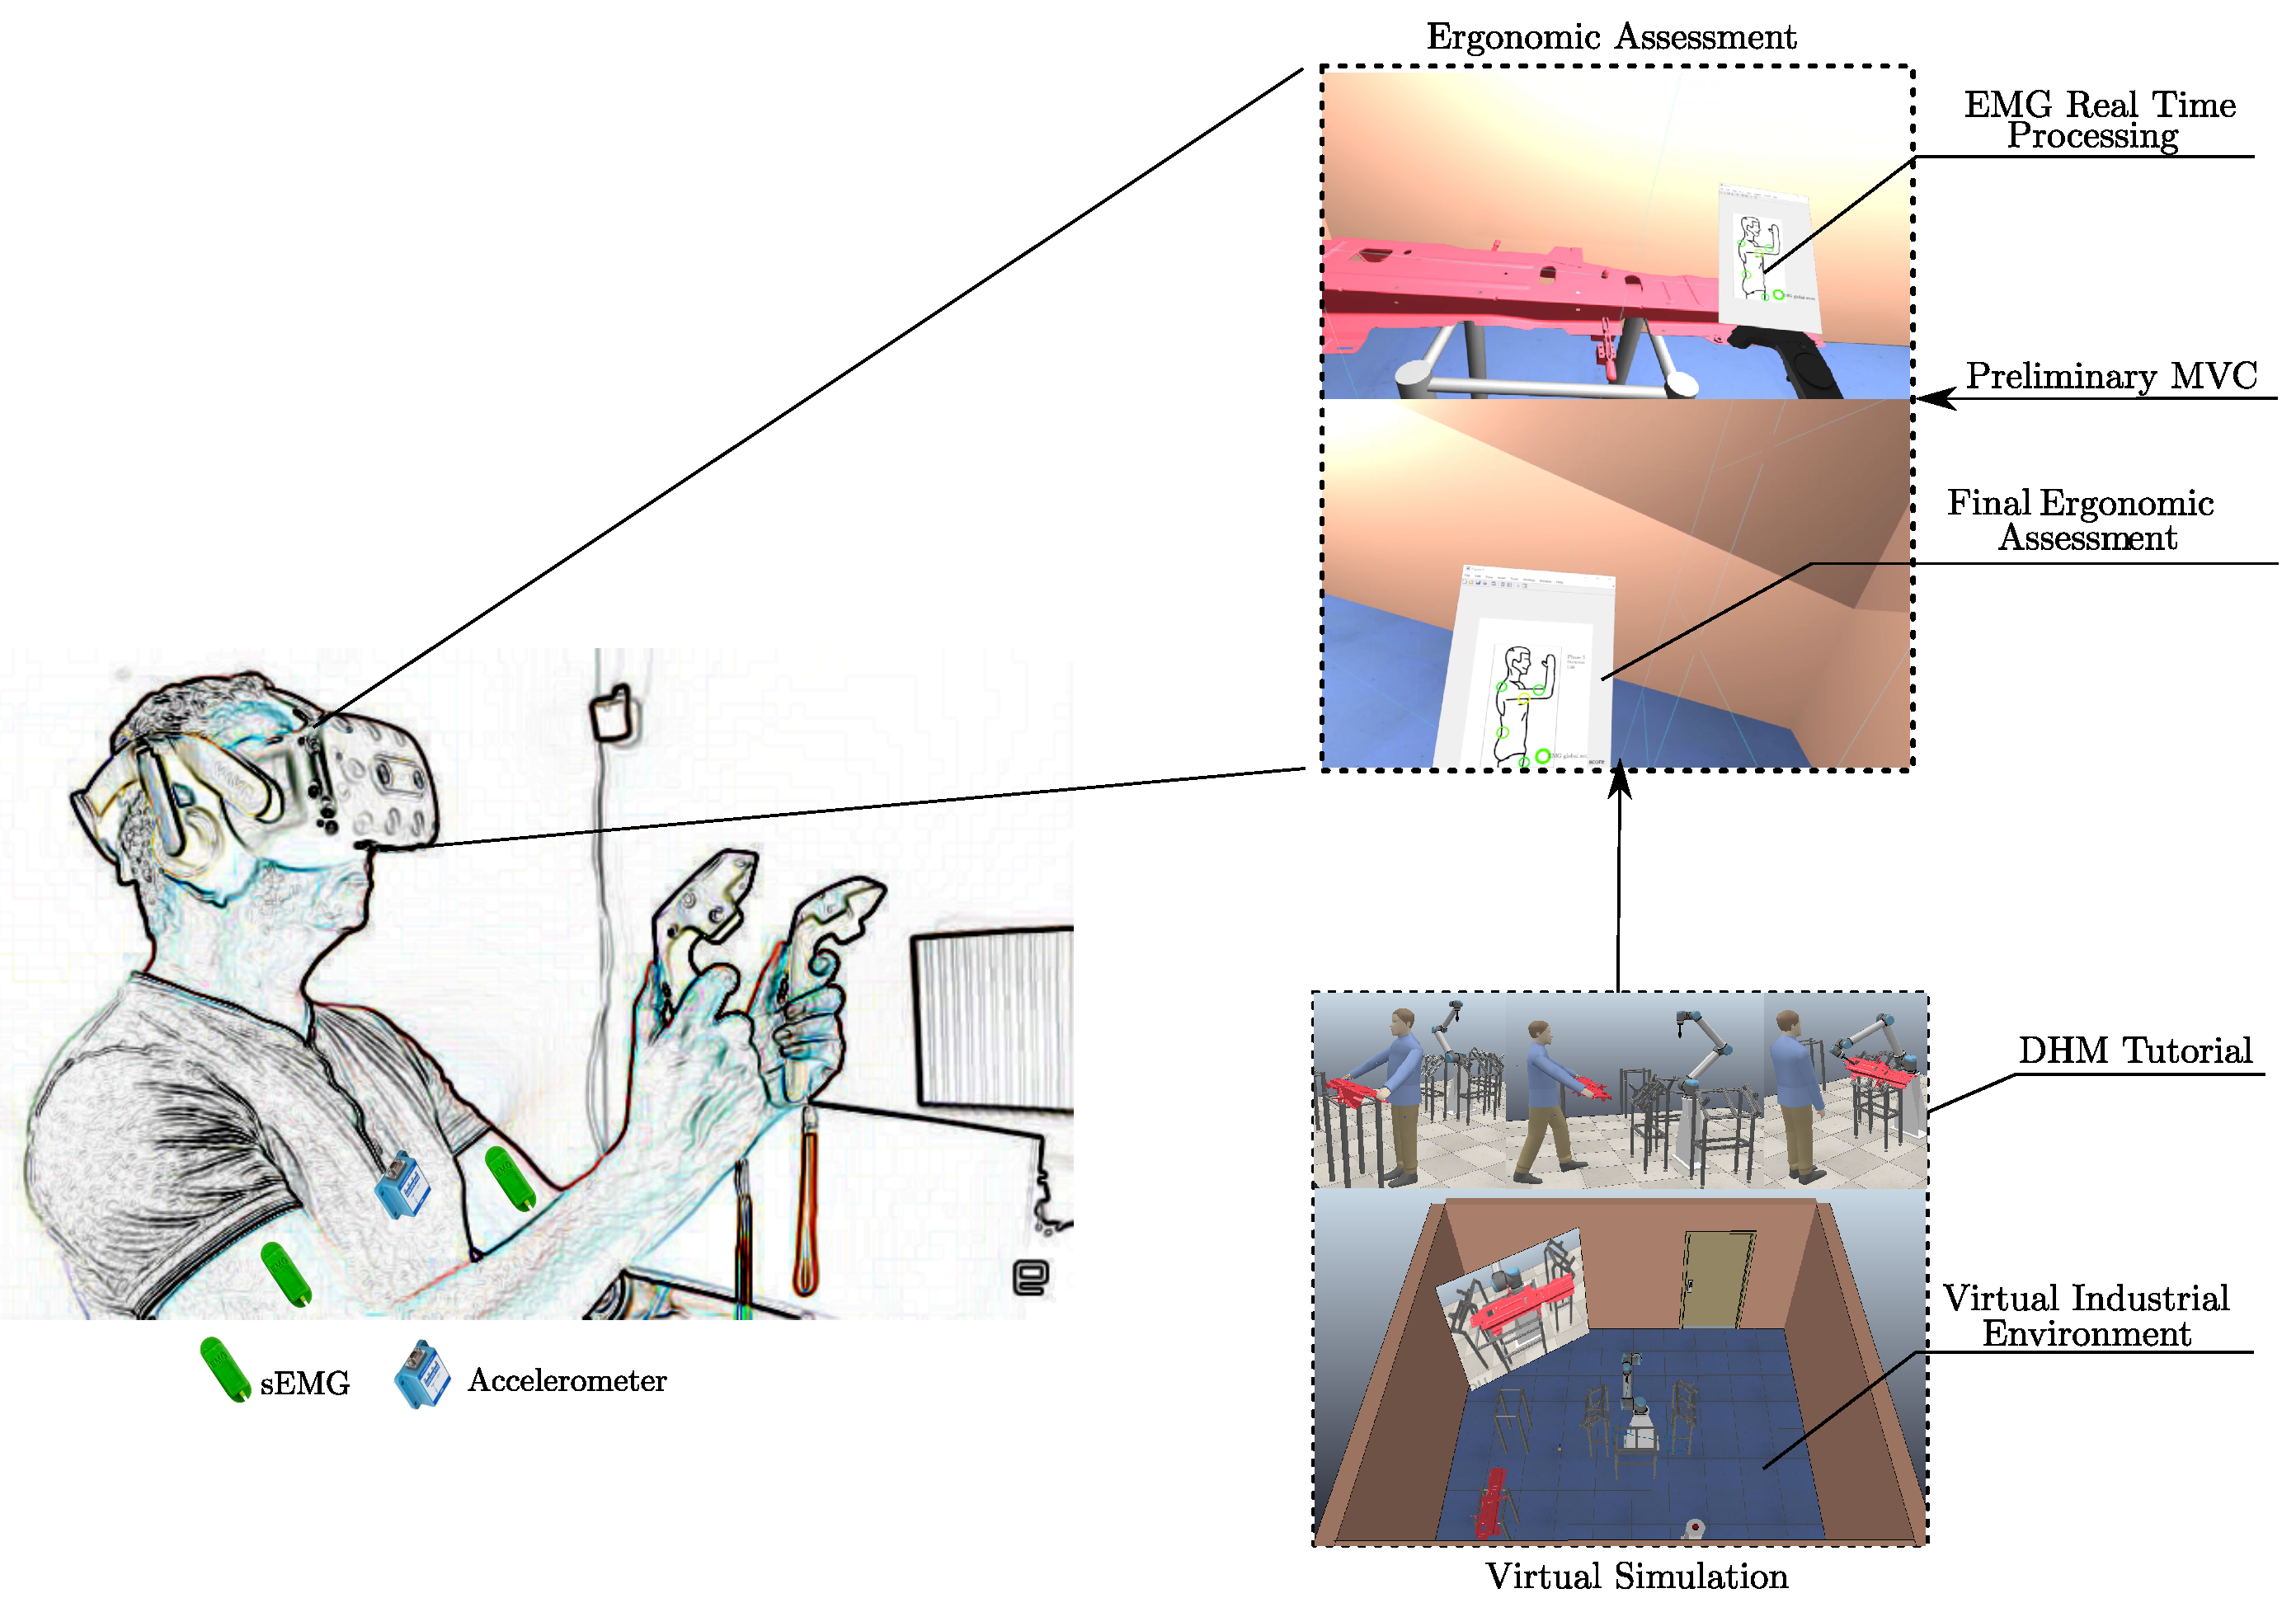 Sensors | Free Full-Text | Development of an Integrated Virtual Reality  System with Wearable Sensors for Ergonomic Evaluation of Human&ndash;Robot  Cooperative Workplaces | HTML